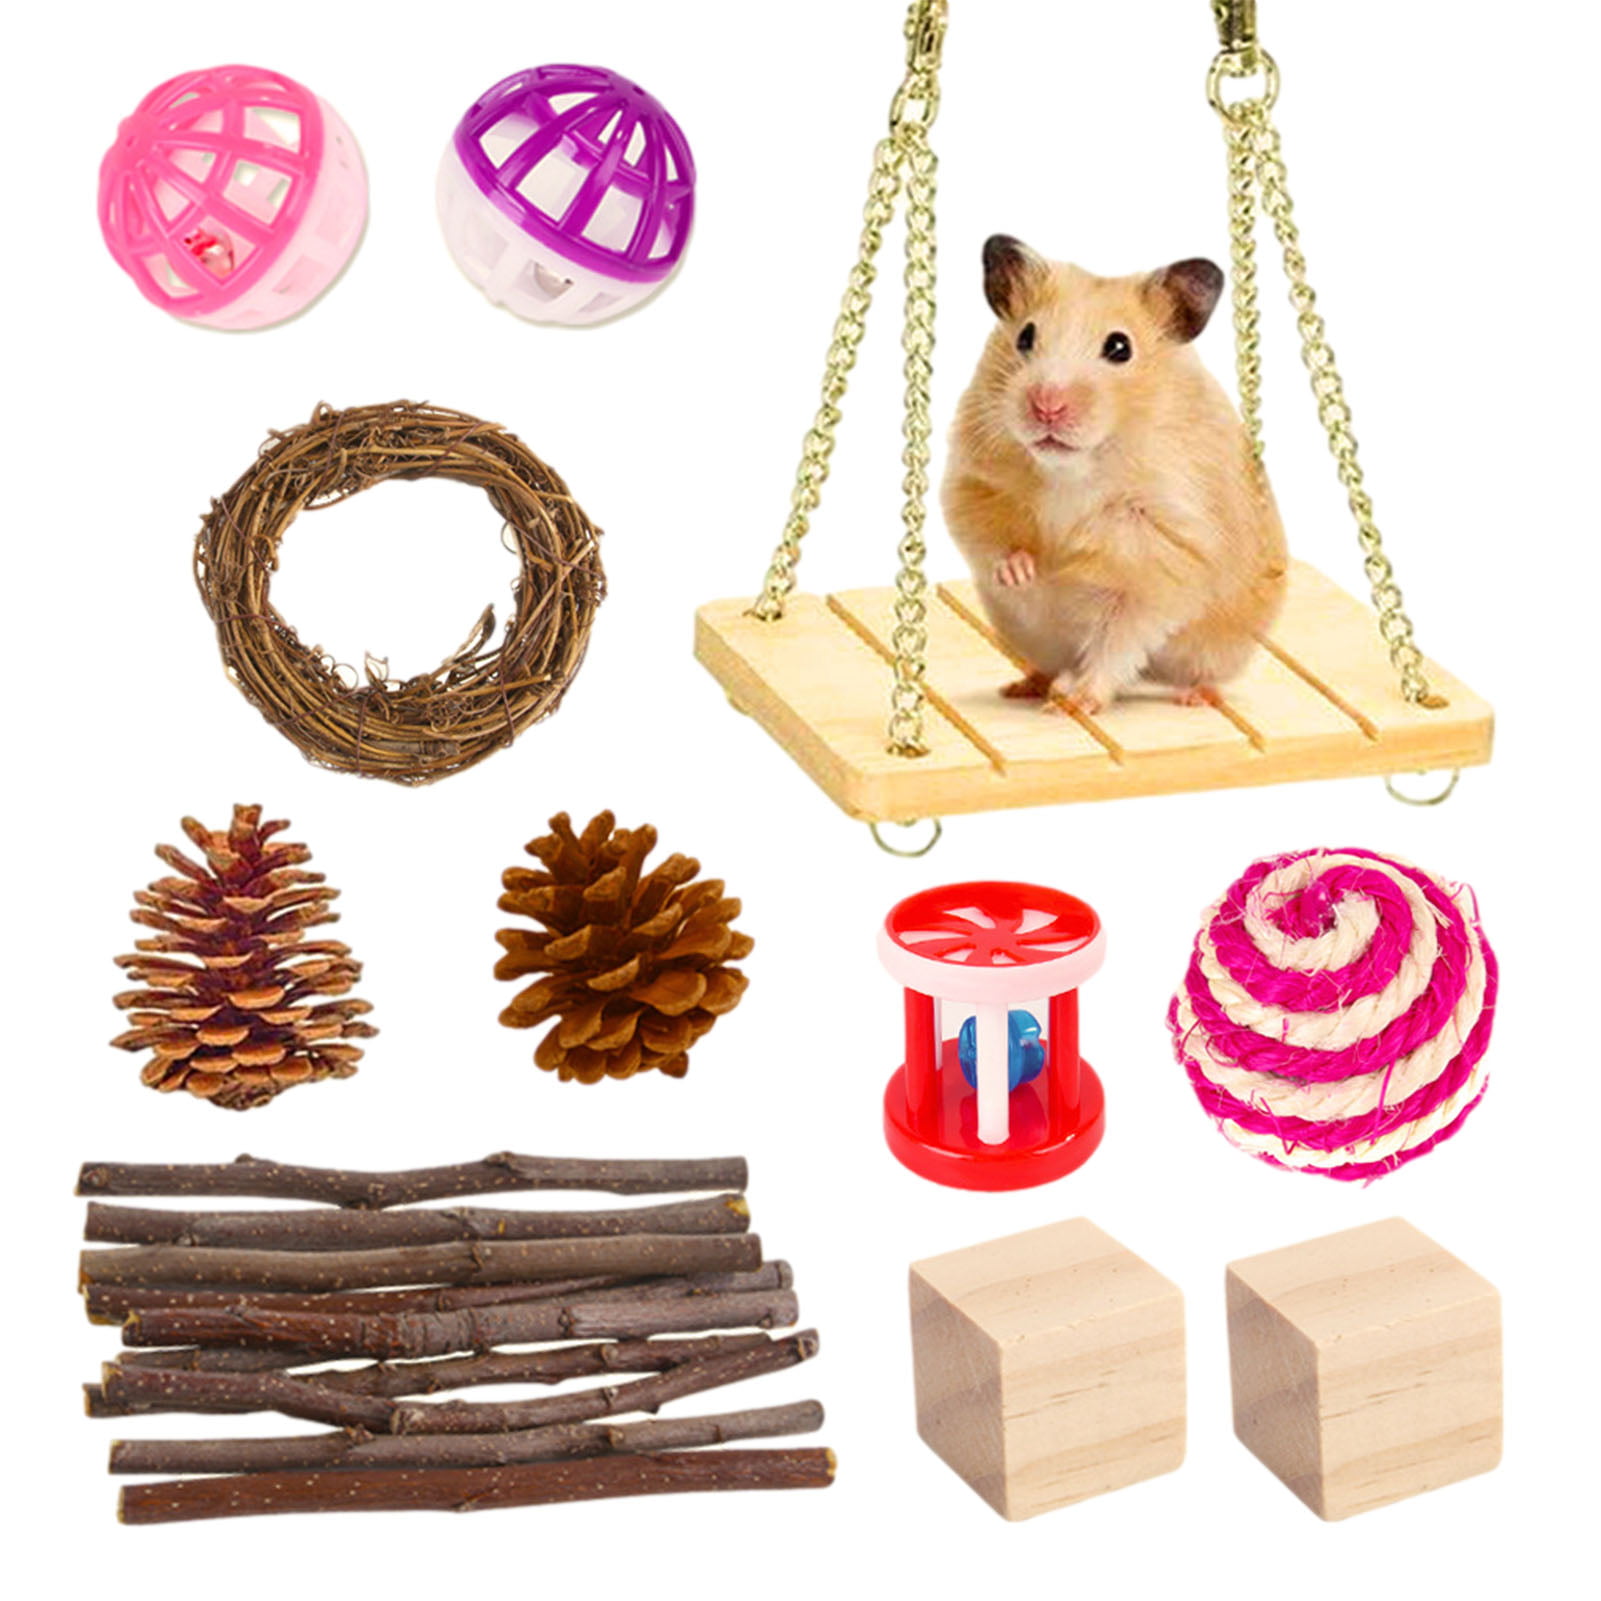 TIMESETL 14 Pack Hamster Chew Toys,Natural Wooden Pine Guinea Pigs Rats Chinchillas Toys Accessories,Dumbbells Exercise Bell Roller Teeth Care Molar Toy for Hamster Rabbits Gerbil Parrot